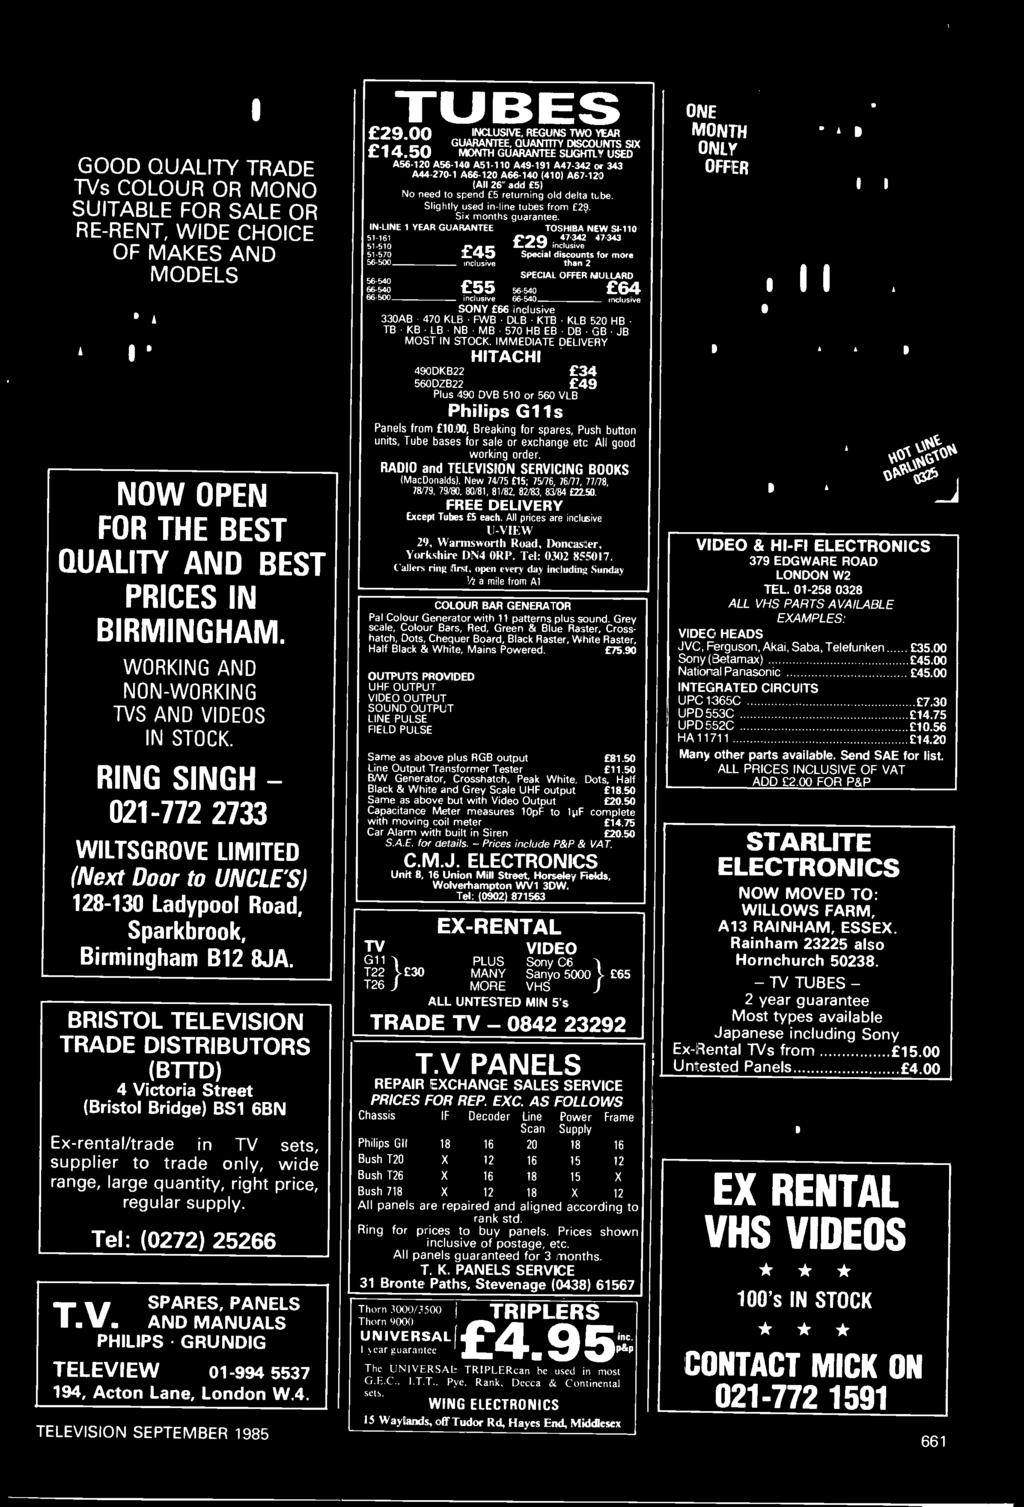 4. TELEVISION SEPTEMBER 1985 TUBES 29.00 INCLUSIVE, REGUNS TWO YEAR GUARANTEE, GUANTTTY DISCOUNTS SIX 14.